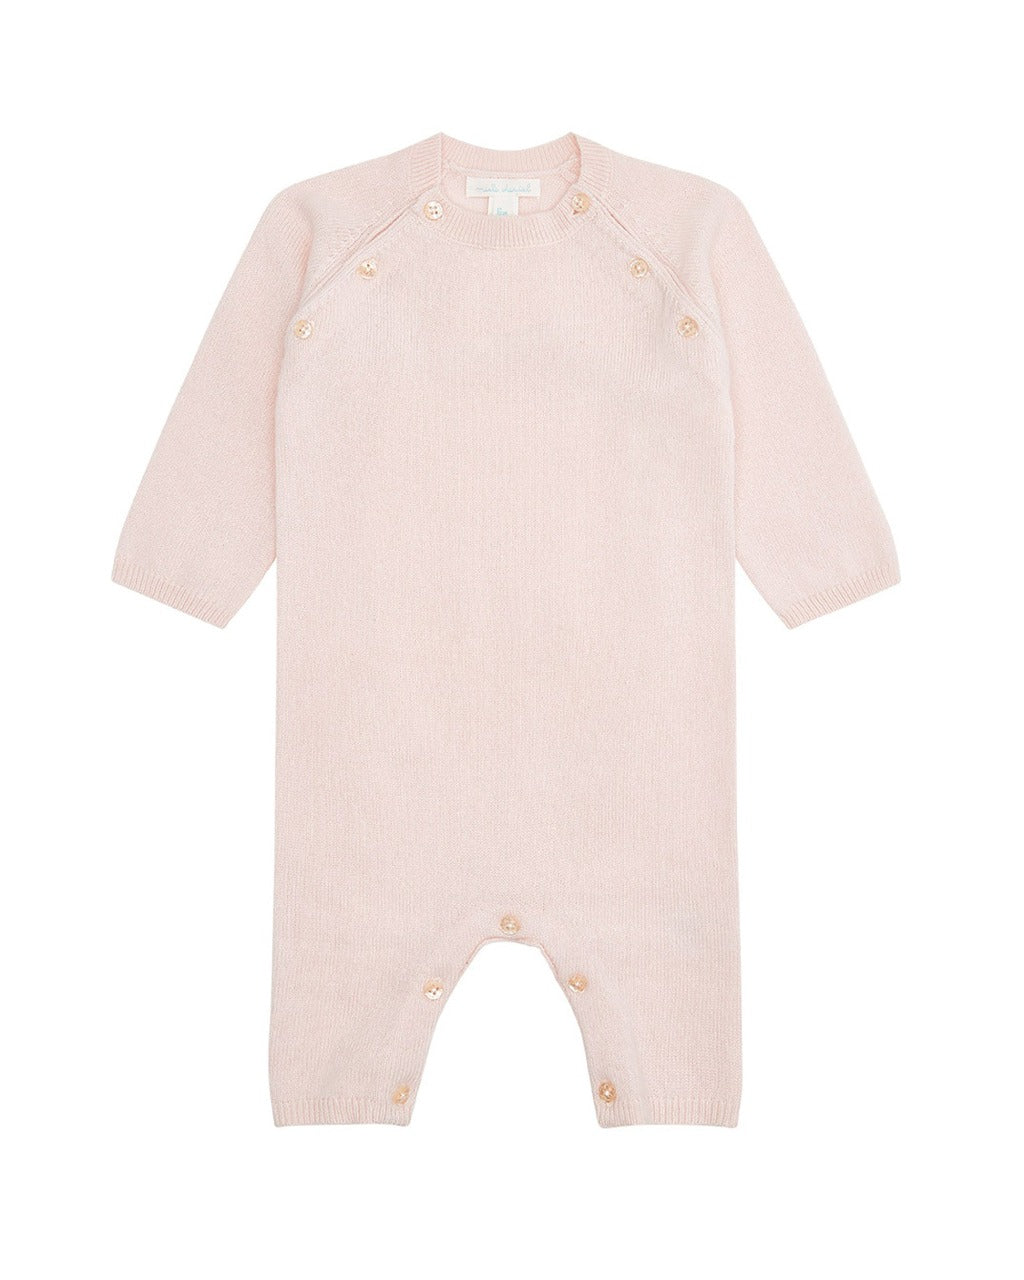 pink cashmere baby romper with buttons by marie chantal